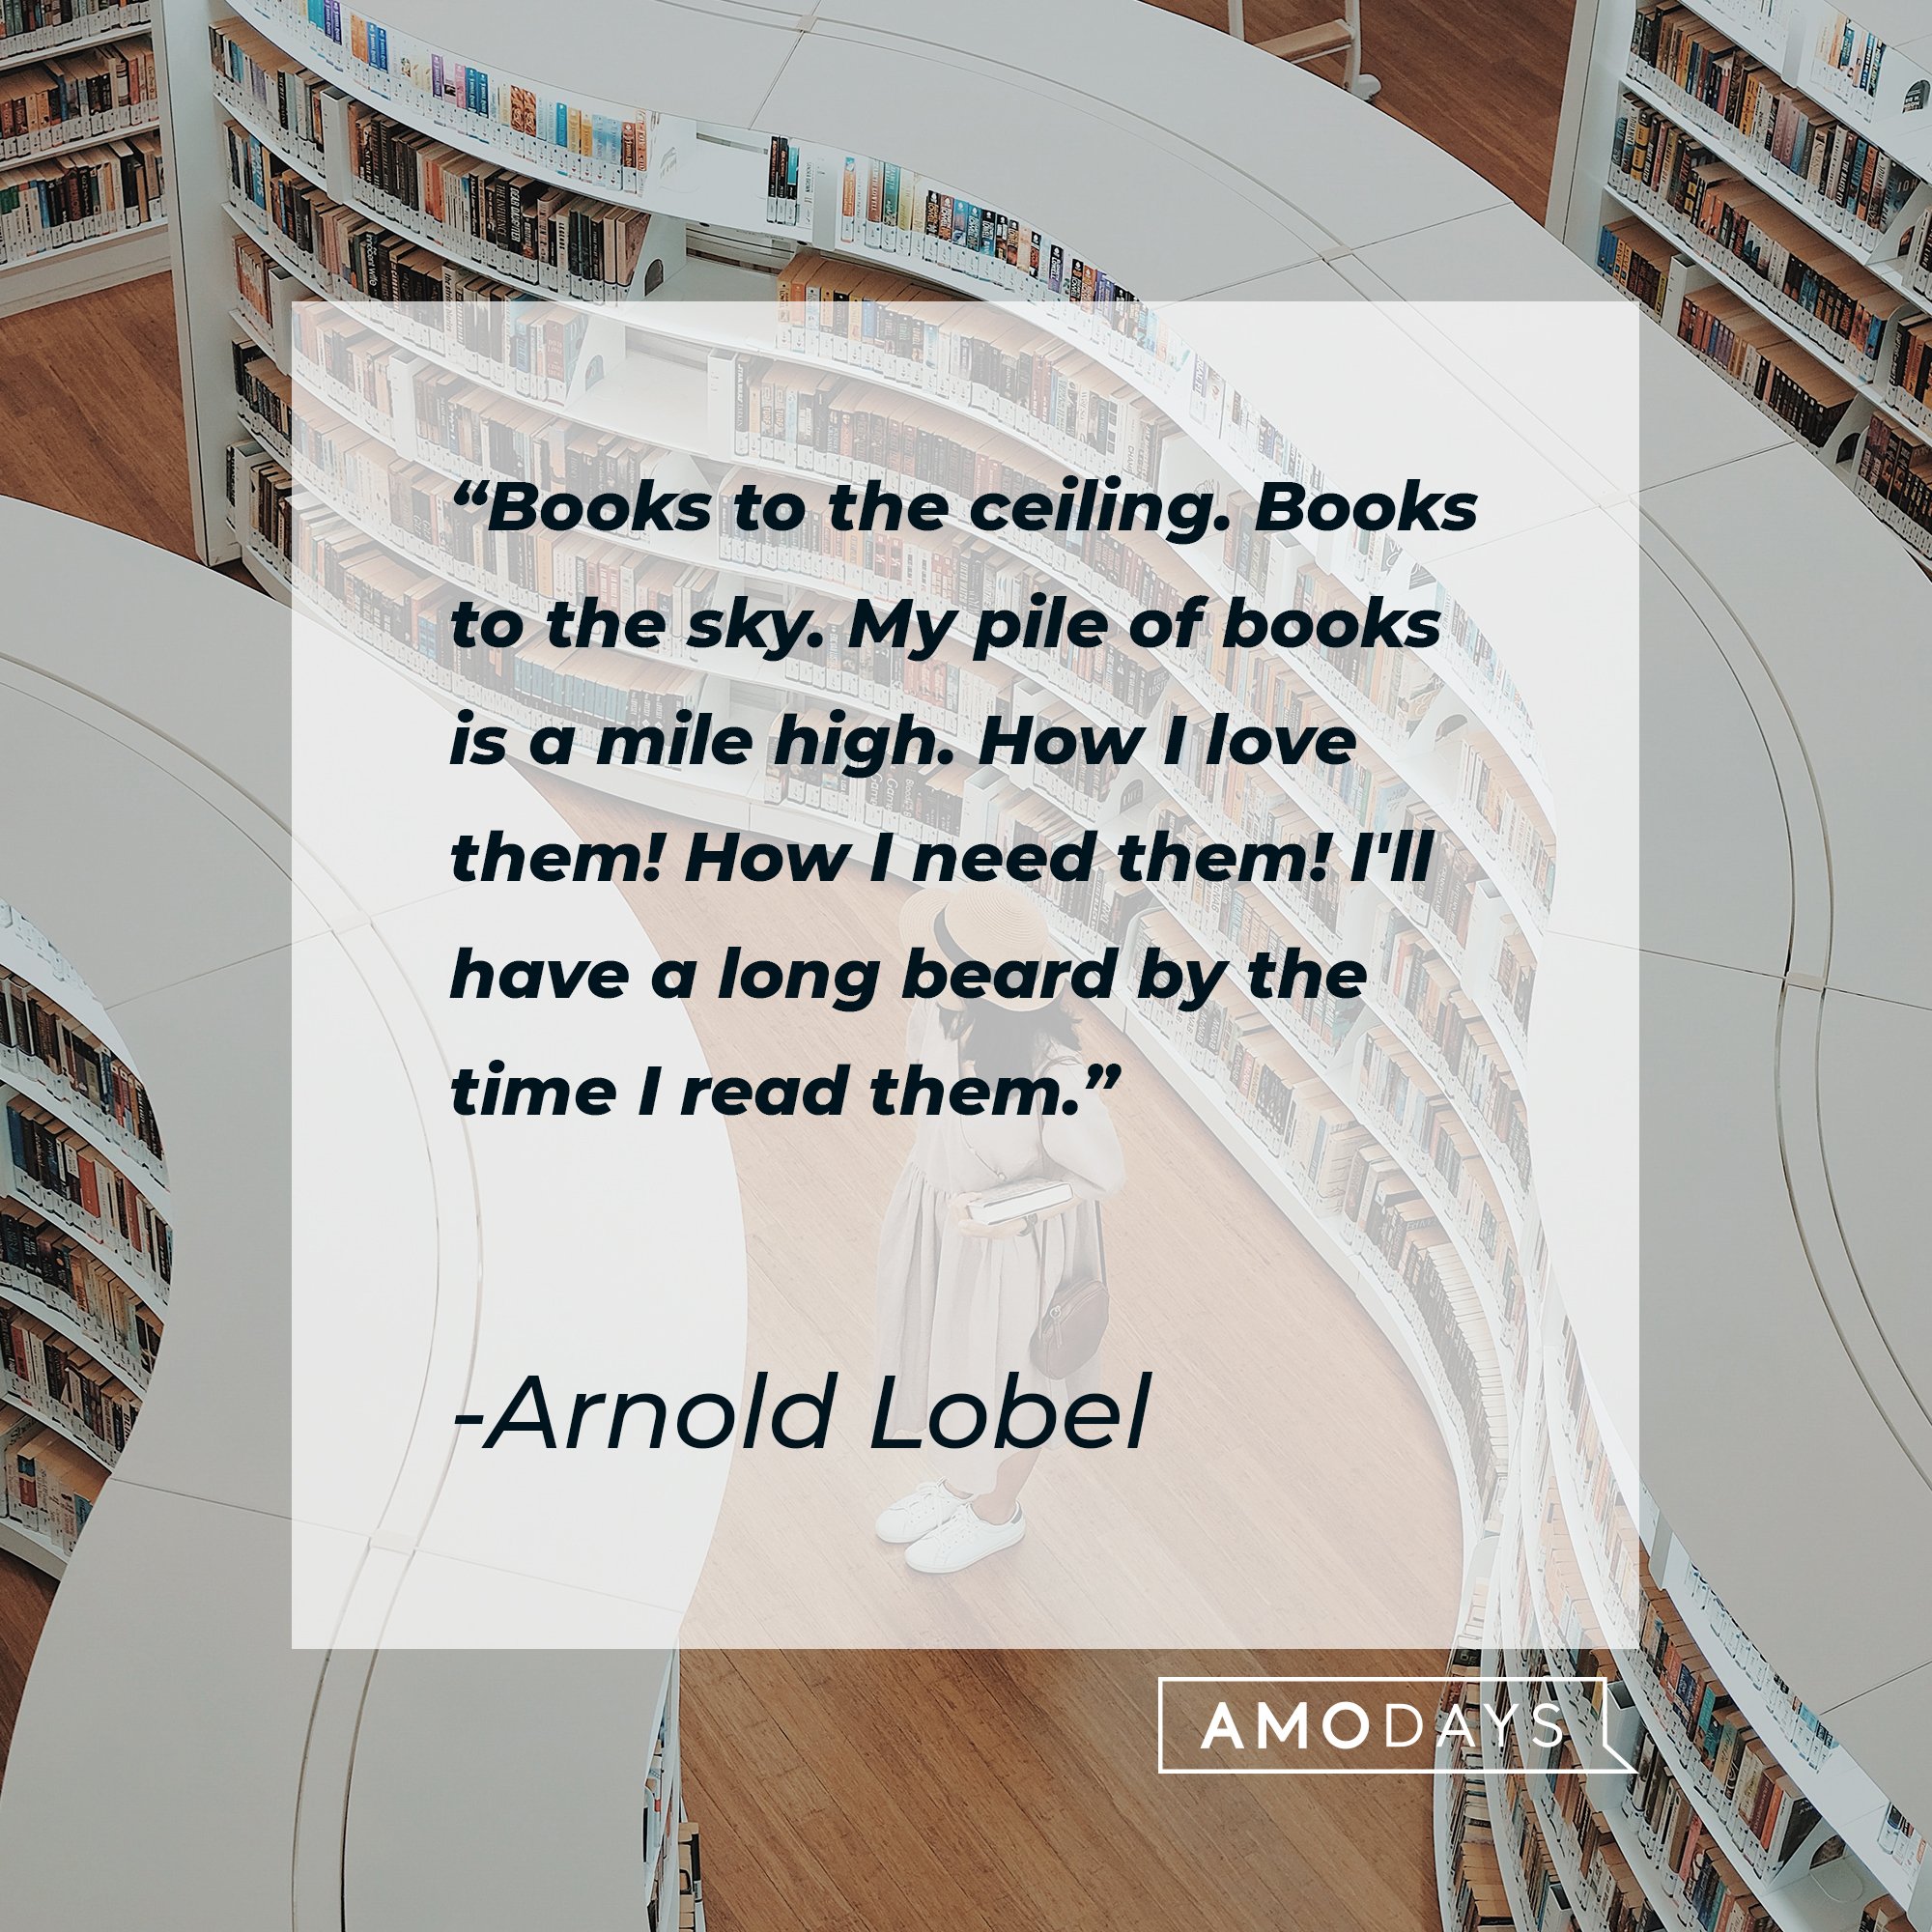 Arnold Lobel’s quote: "Books to the ceiling. Books to the sky. My pile of books is a mile high. How I love them! How I need them! I'll have a long beard by the time I read them." | Image: AmoDays